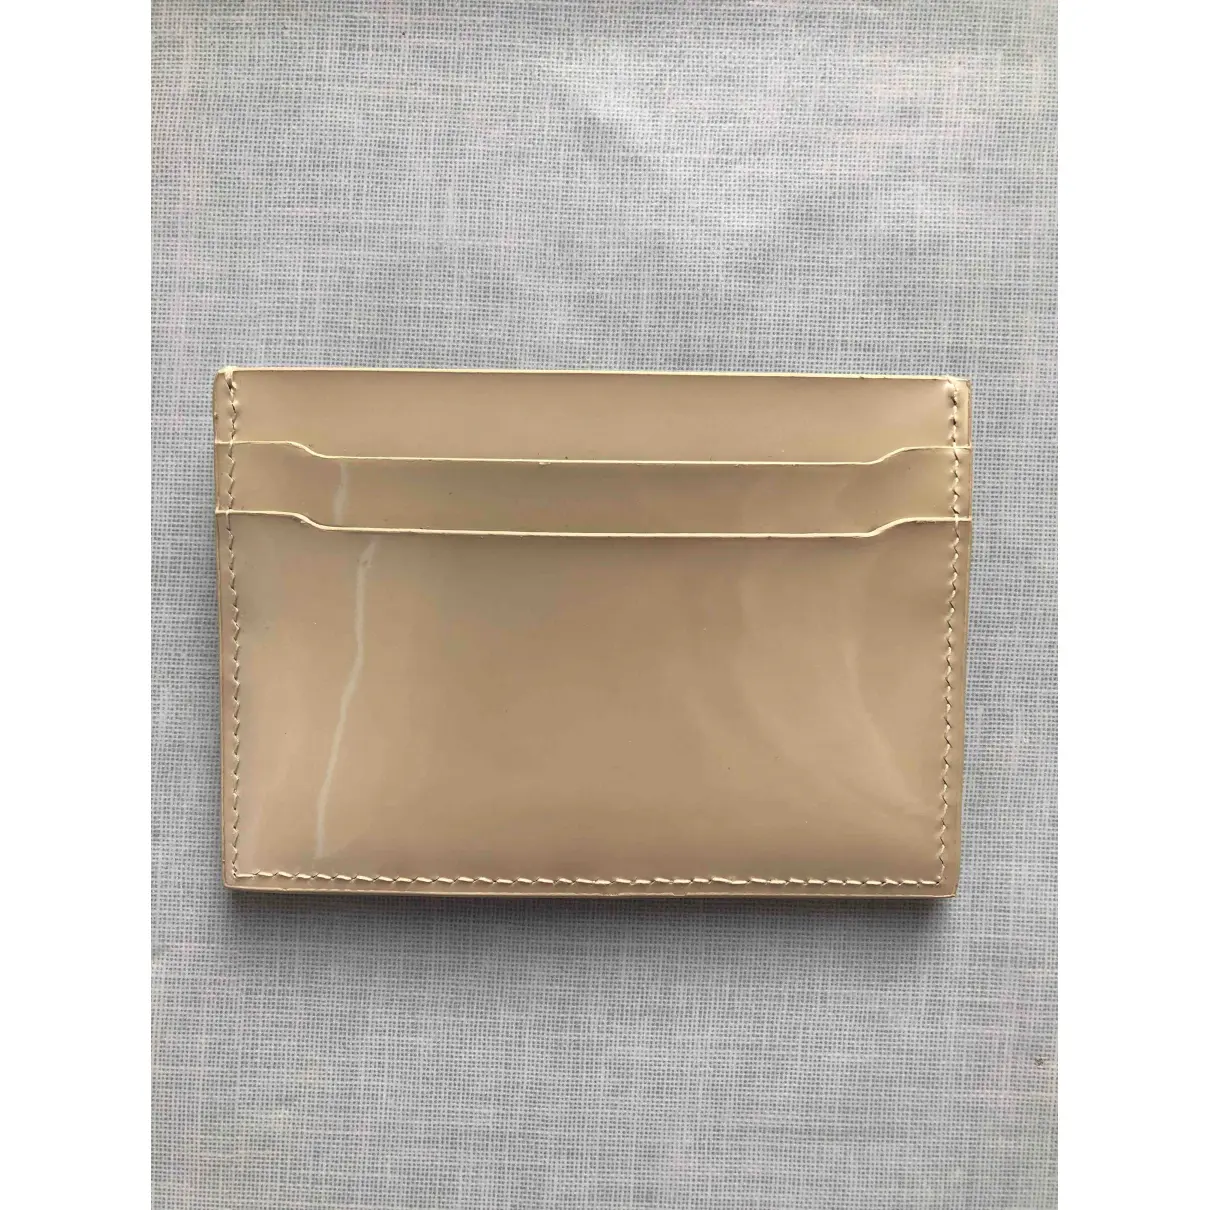 Buy Bvlgari Patent leather card wallet online